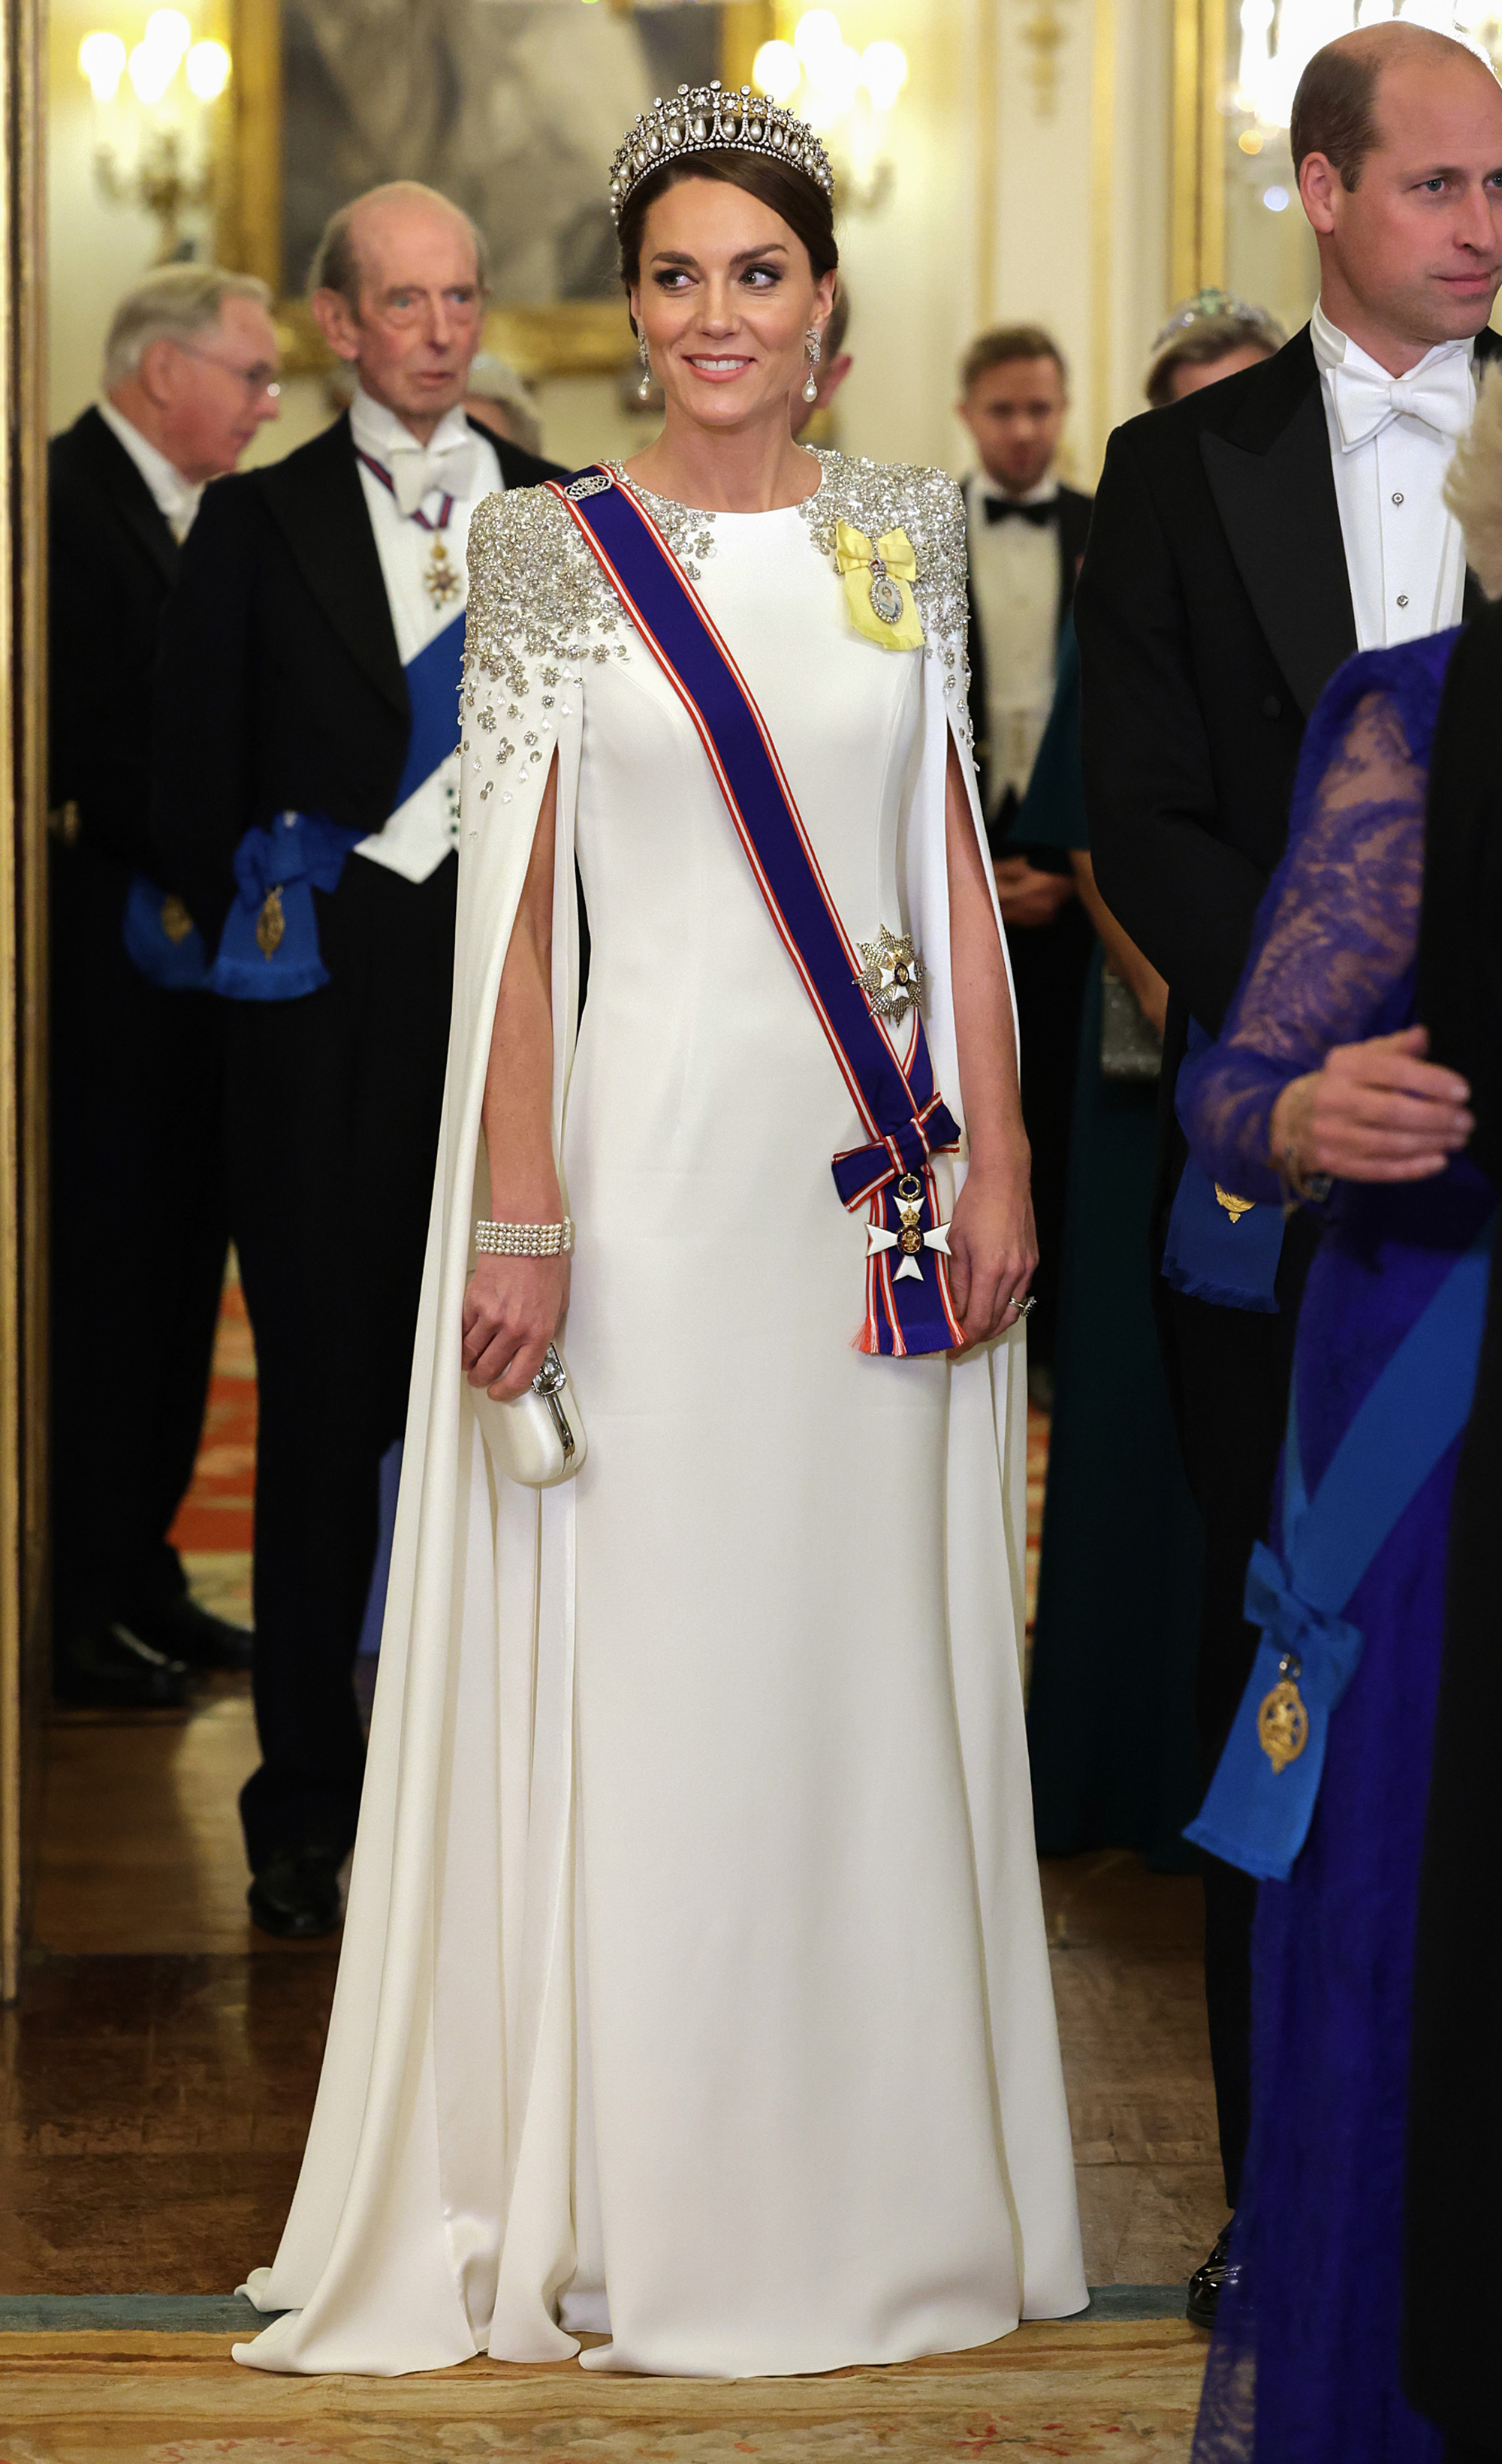 The Princess of Wales during the State Banquet at Buckingham Palace